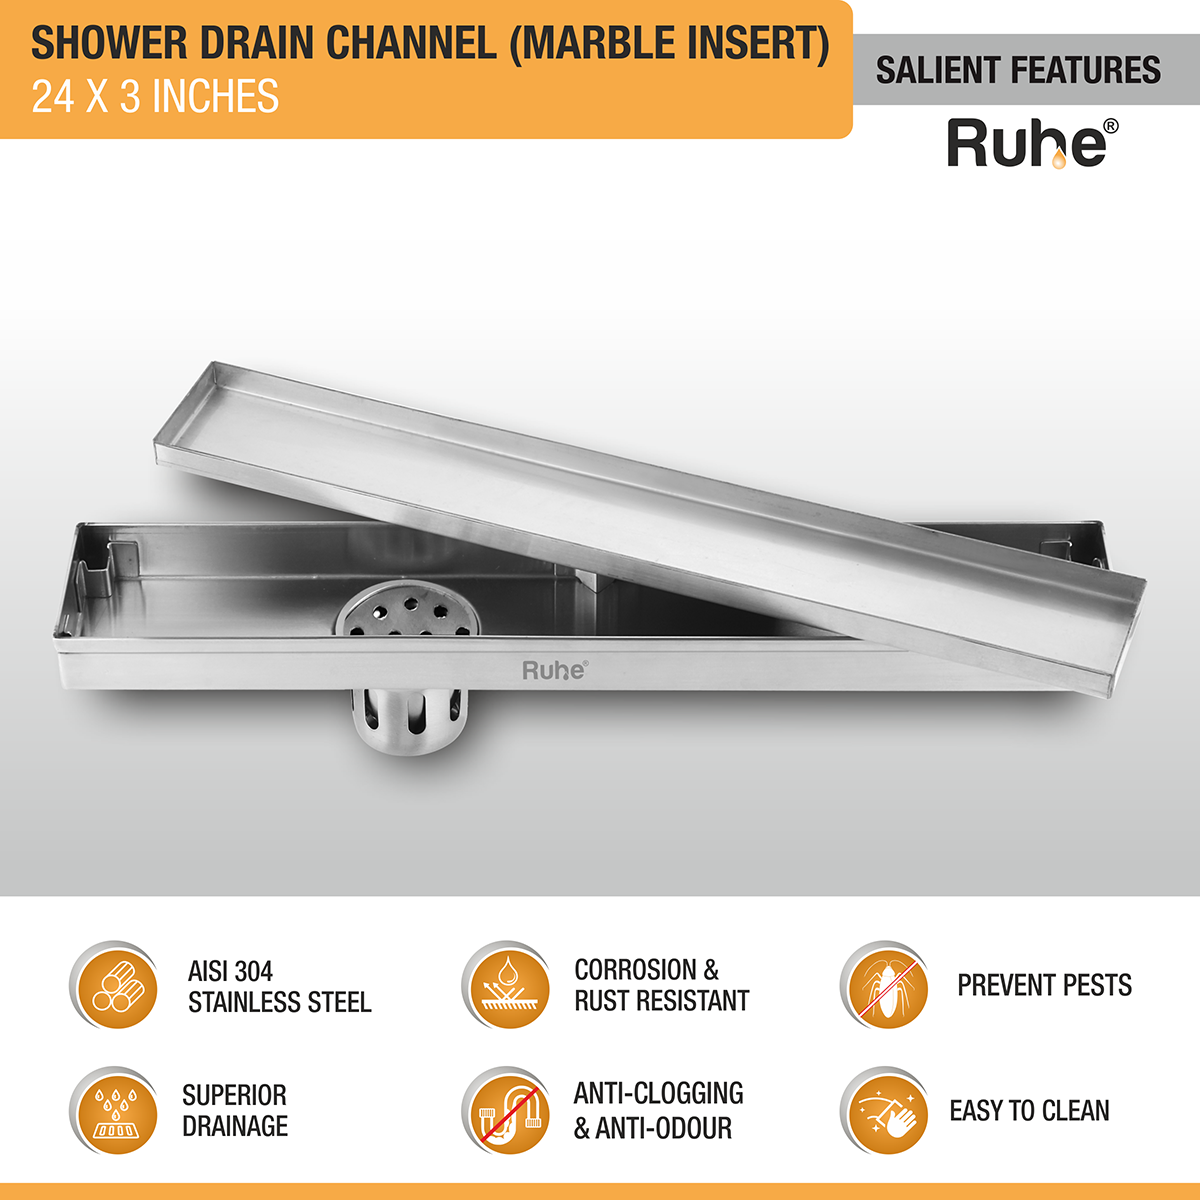 Marble Insert Shower Drain Channel (24 x 3 Inches) with Cockroach Trap (304 Grade) features